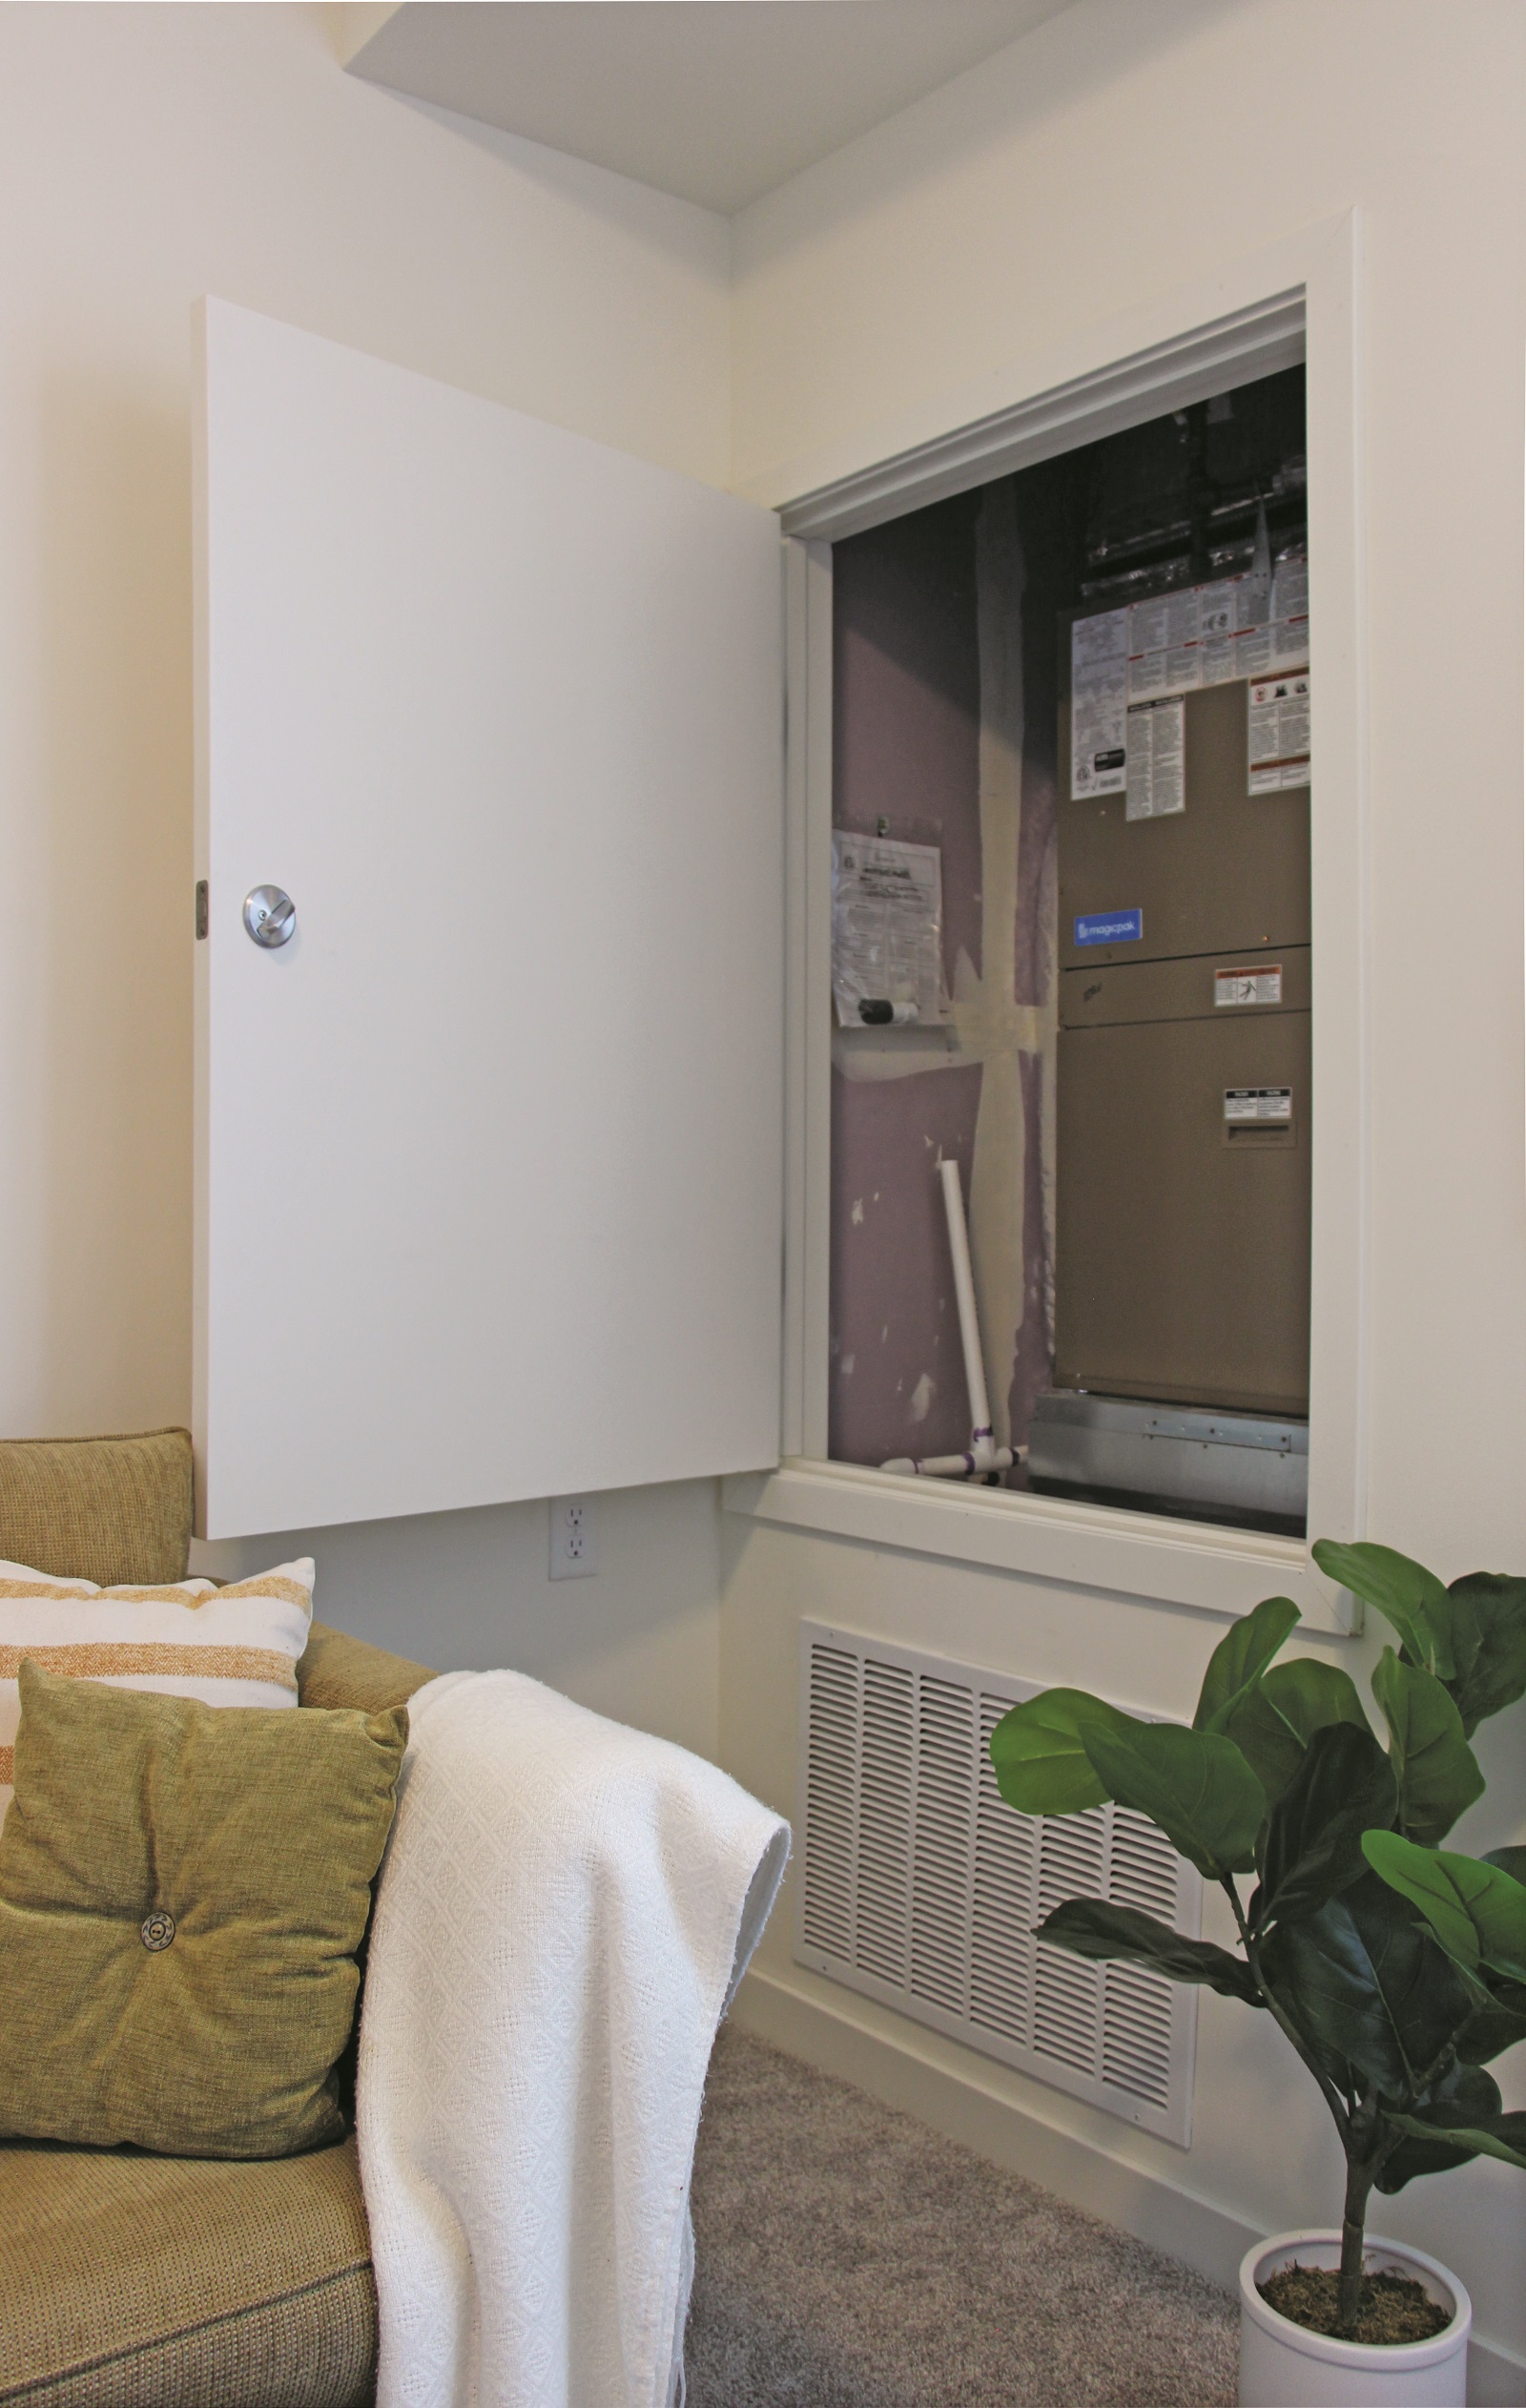 Apanel in the wall of an apartment opens for maintenance access to the MagicPak HVAC unit